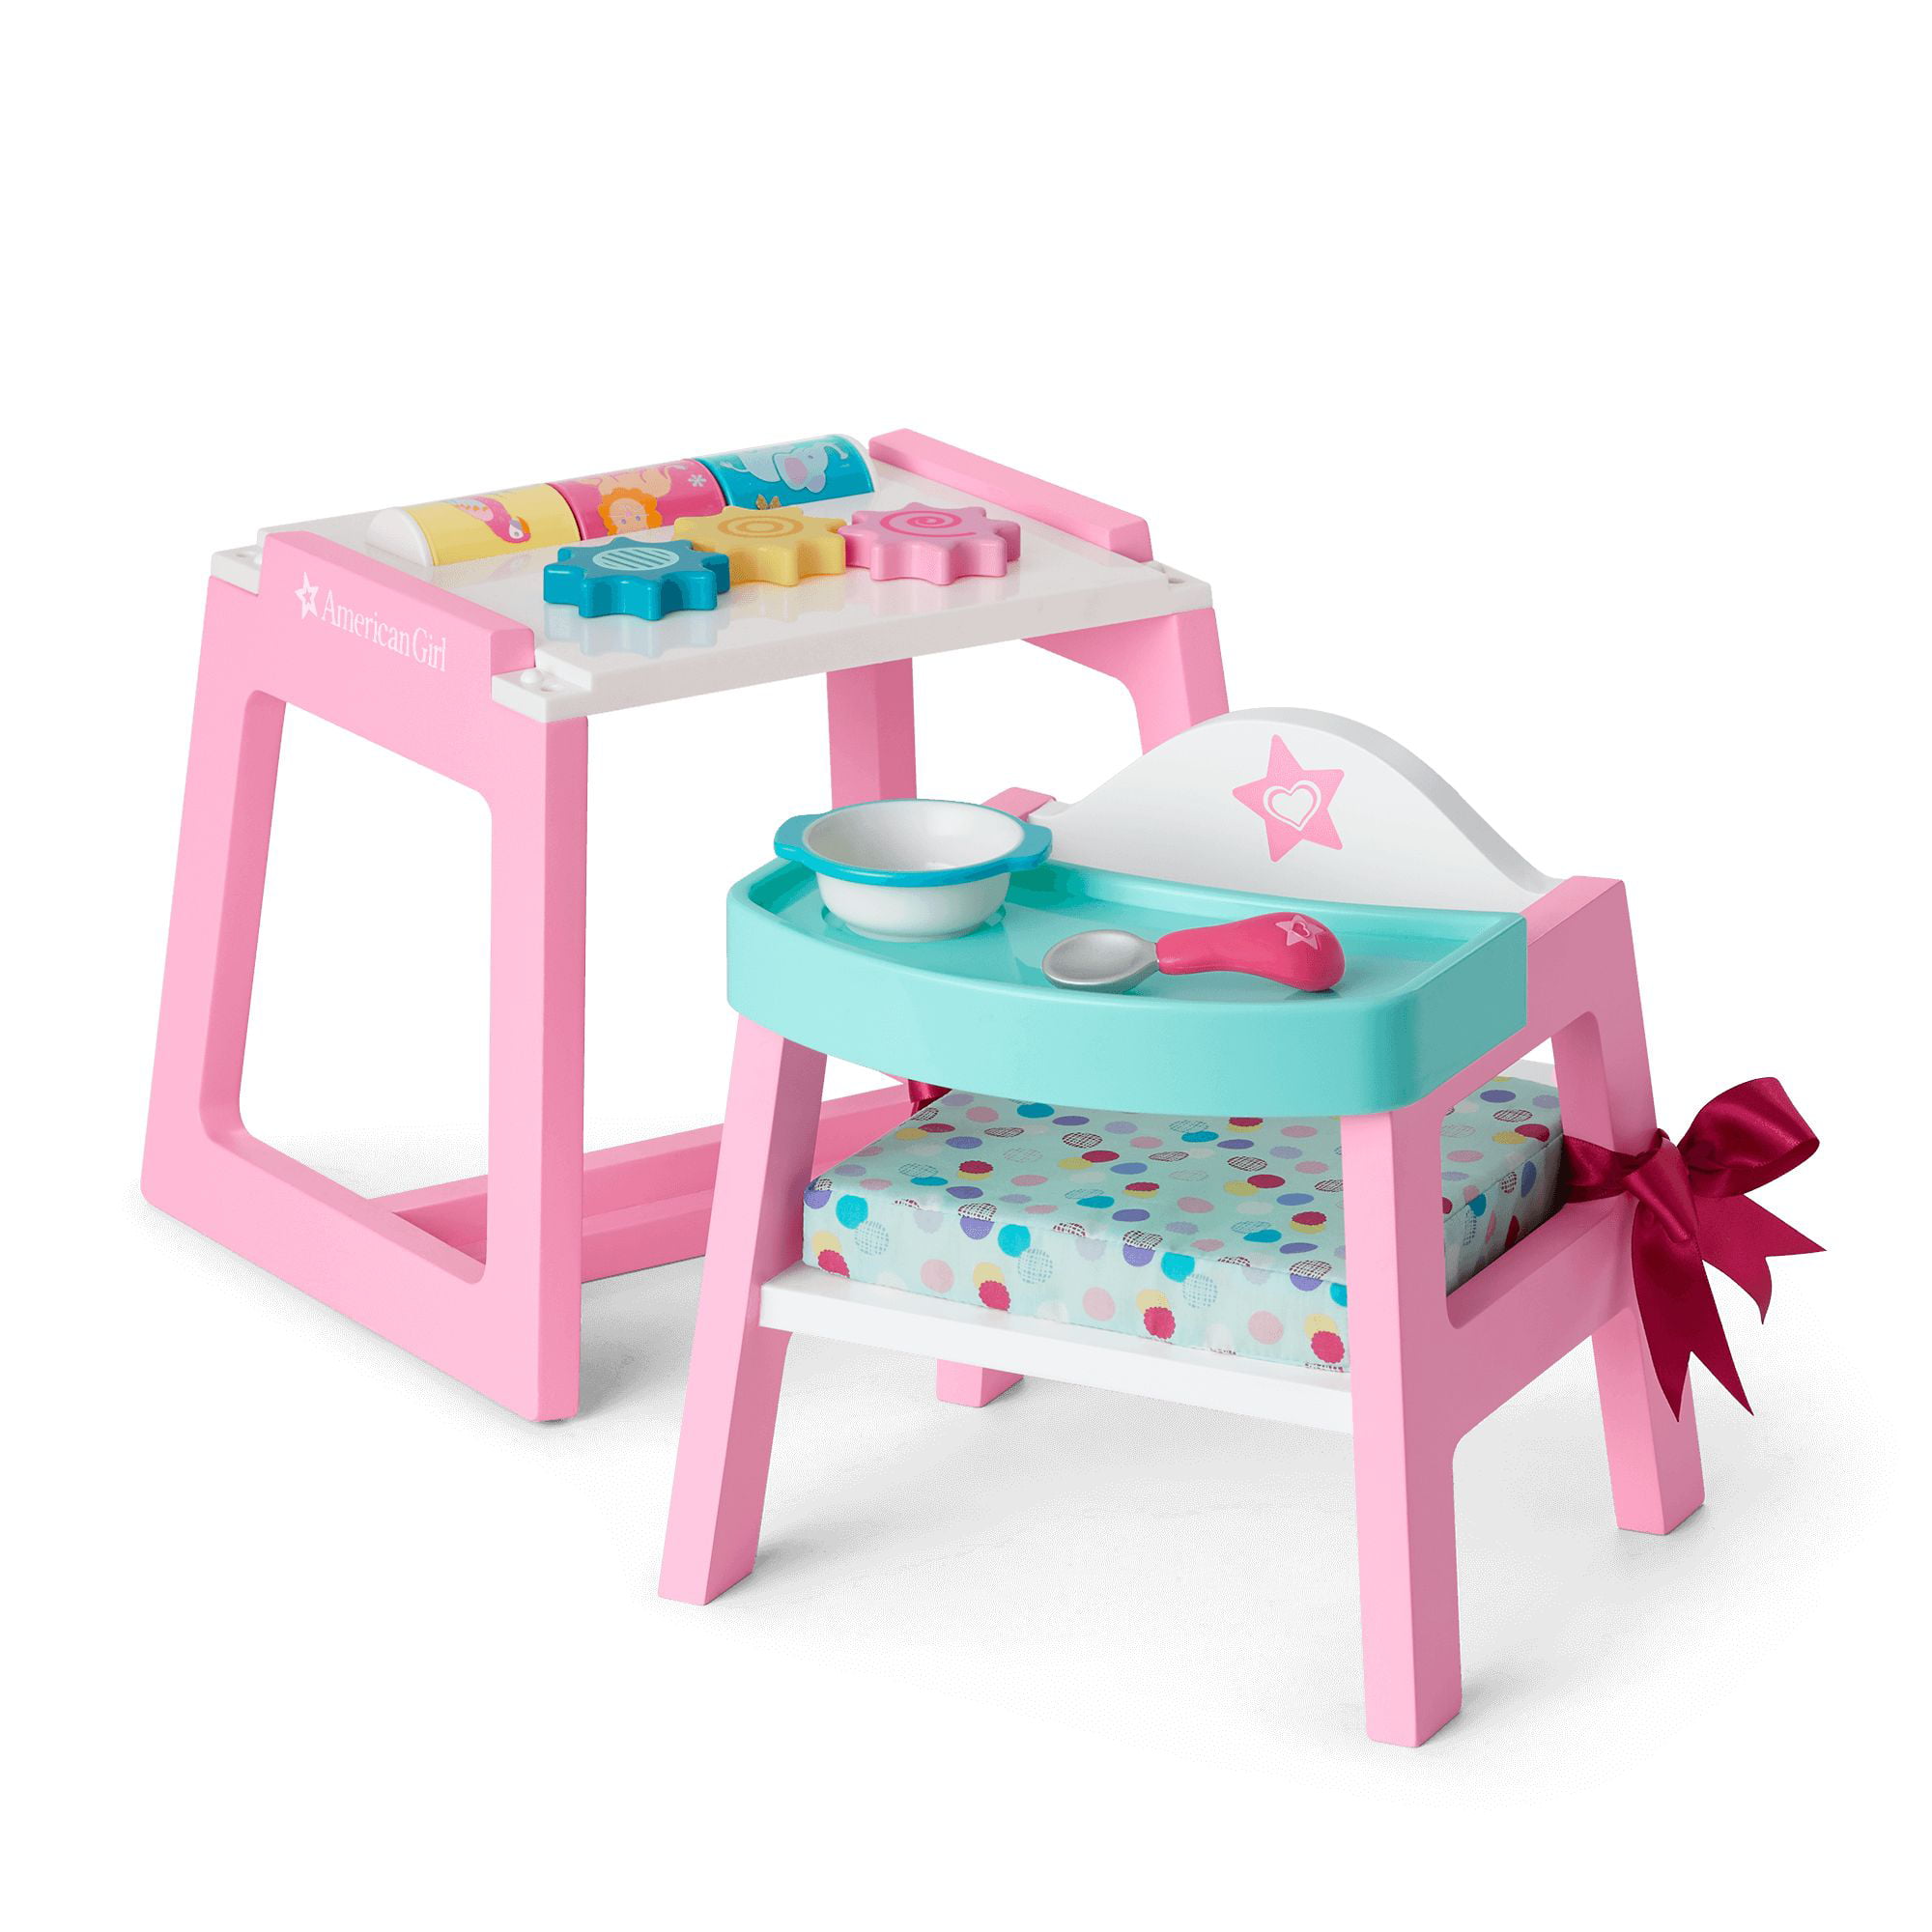 American Girl Bitty Baby Convertible High Chair Table For 15 Dolls Doll Not Included Walmartcom Walmartcom